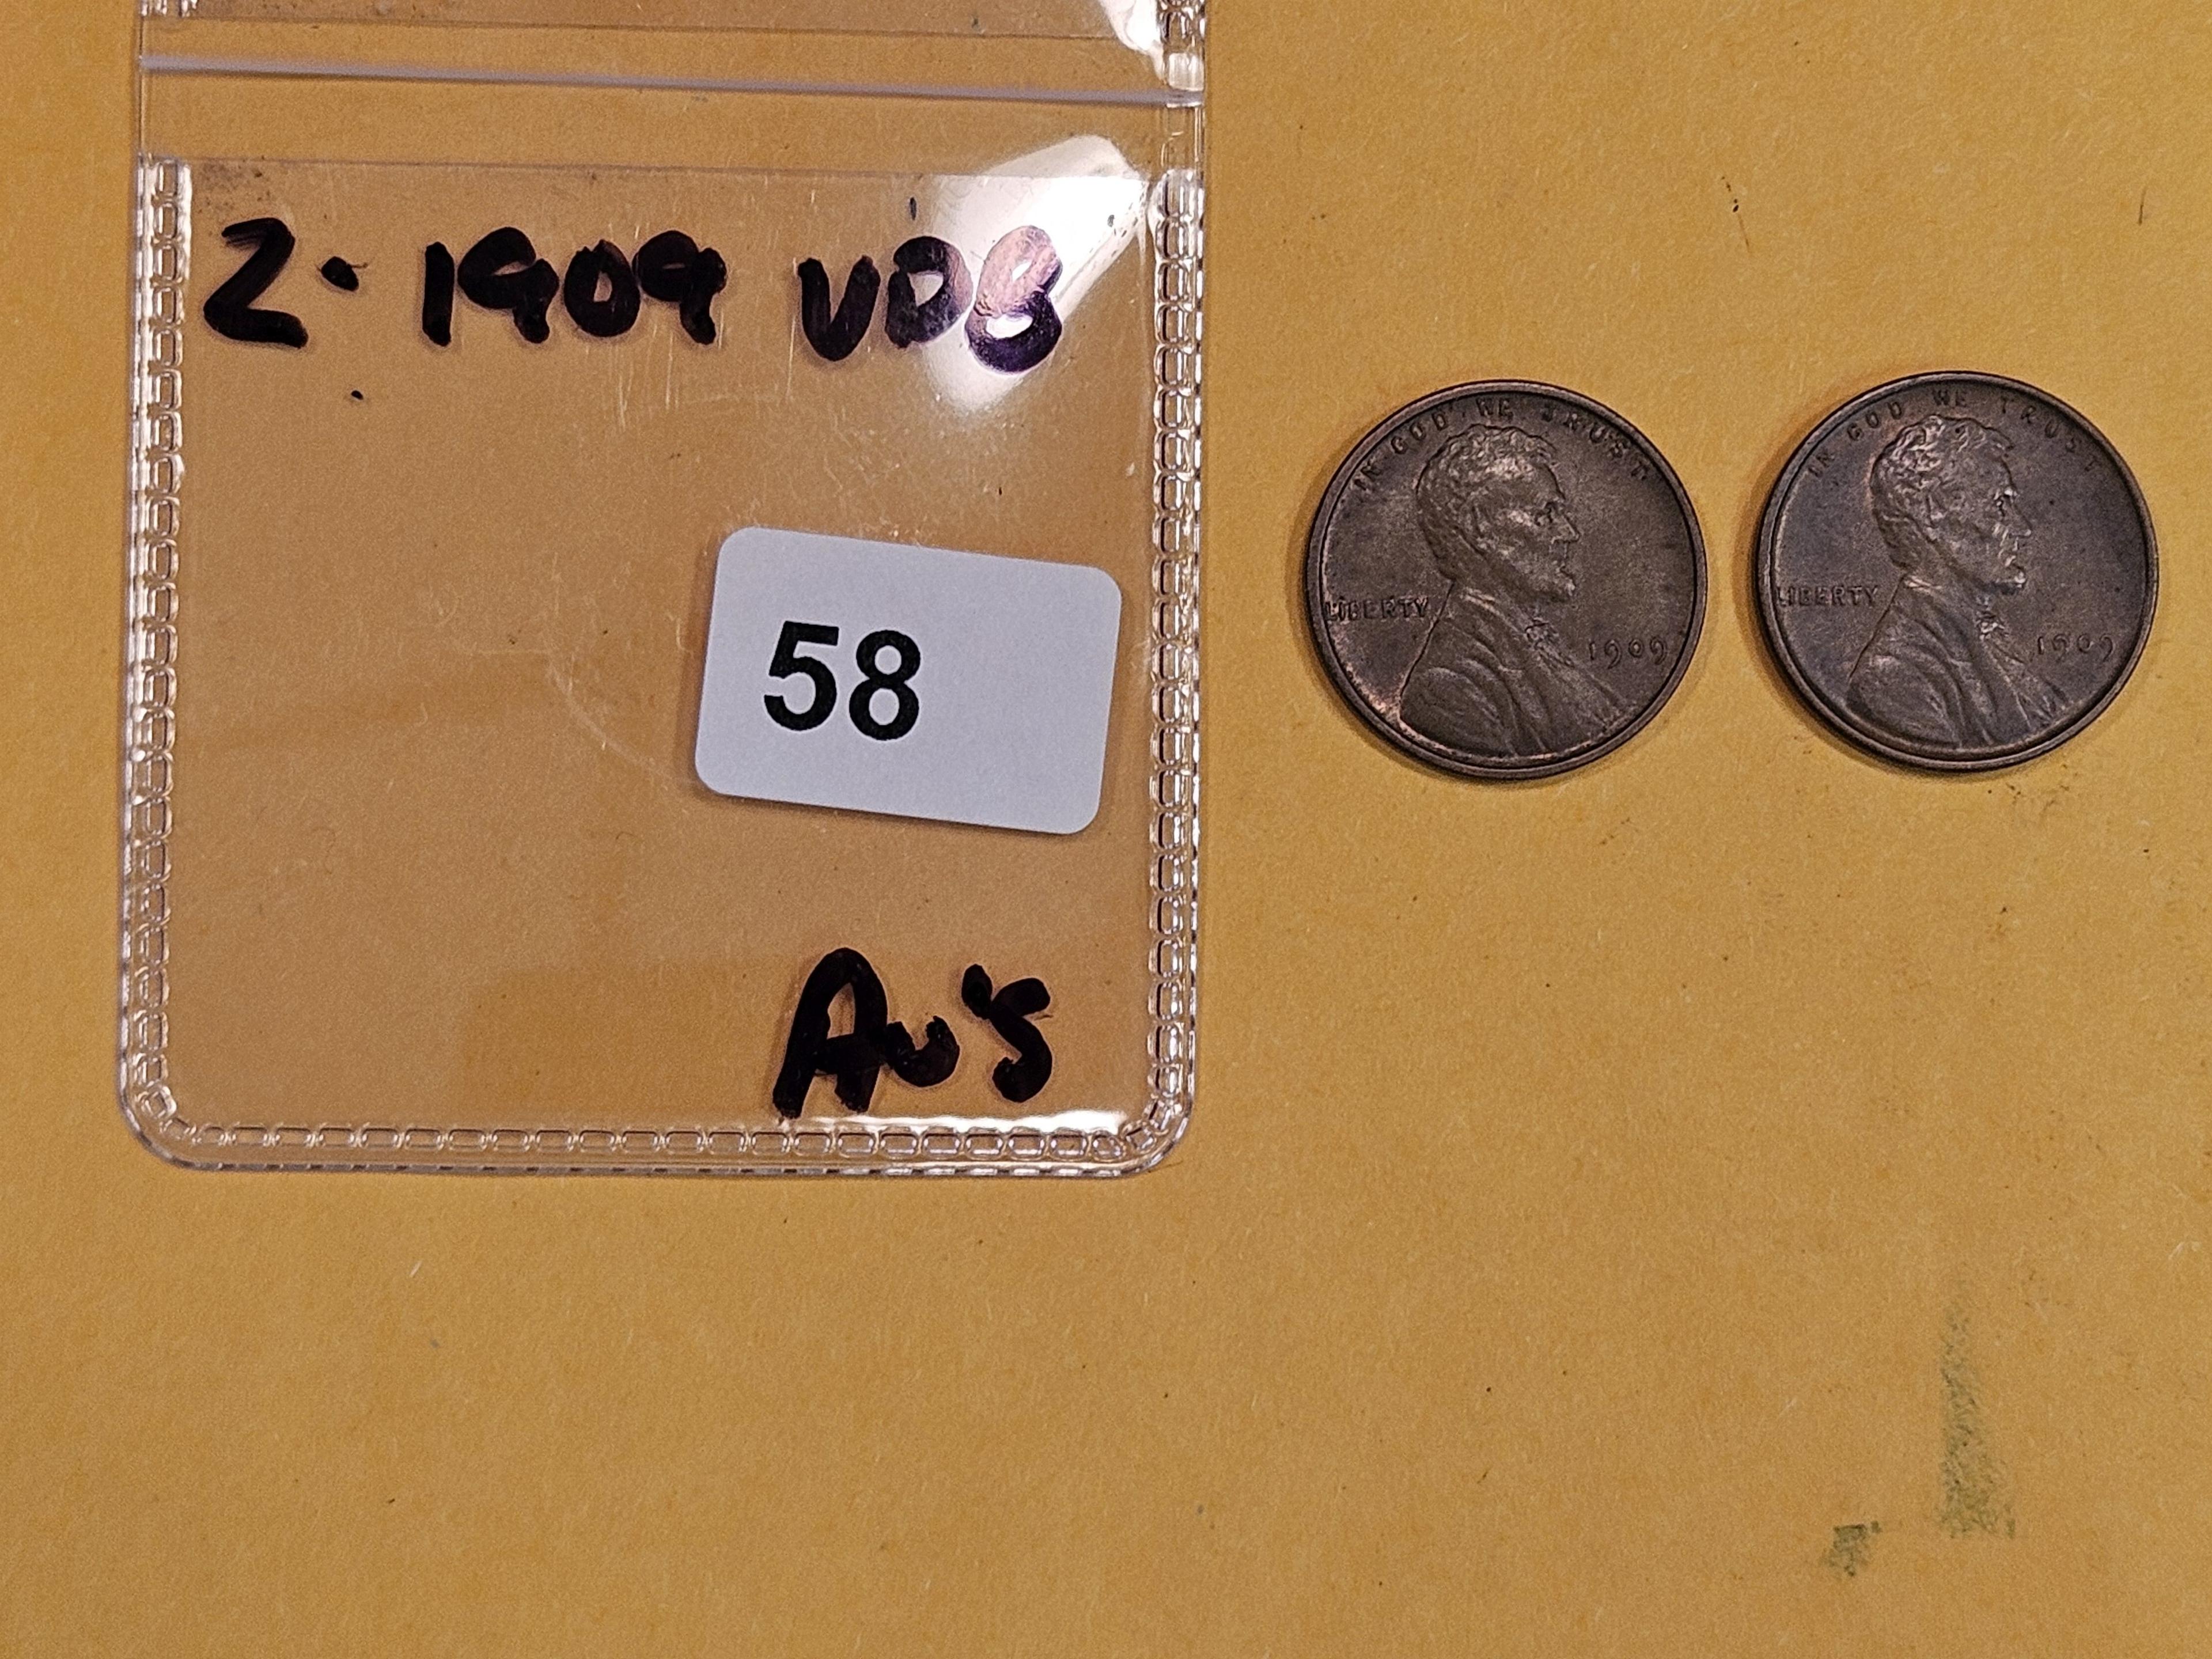 Two 1909-VDB Wheat cents in About Uncirculated